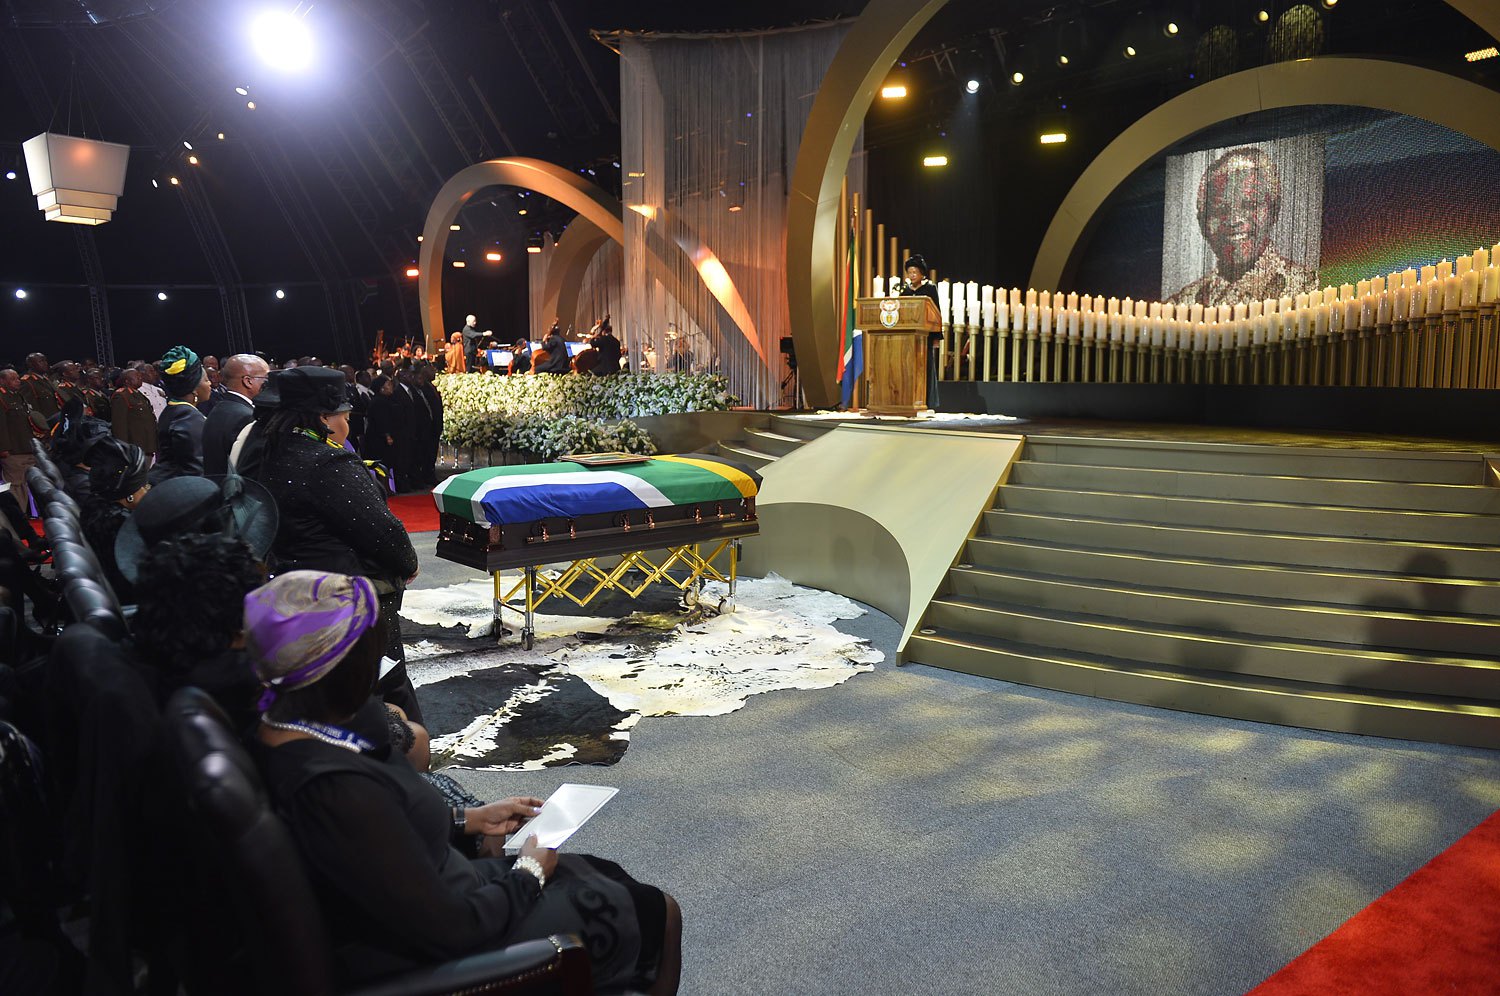 SAFRICA-MANDELA-FUNERAL - The coffin of South African former president Nelson Mandela is seen during his funeral ceremony in Qunu on December 15, 2013. Mandela, the revered icon of the anti-apartheid struggle in South Africa and one of the towering political figures of the 20th century, died in Johannesburg on December 5 at age 95.  AFP PHOTO / POOL / ODD ANDERSEN        (Photo credit should read ODD ANDERSEN/AFP/Getty Images)